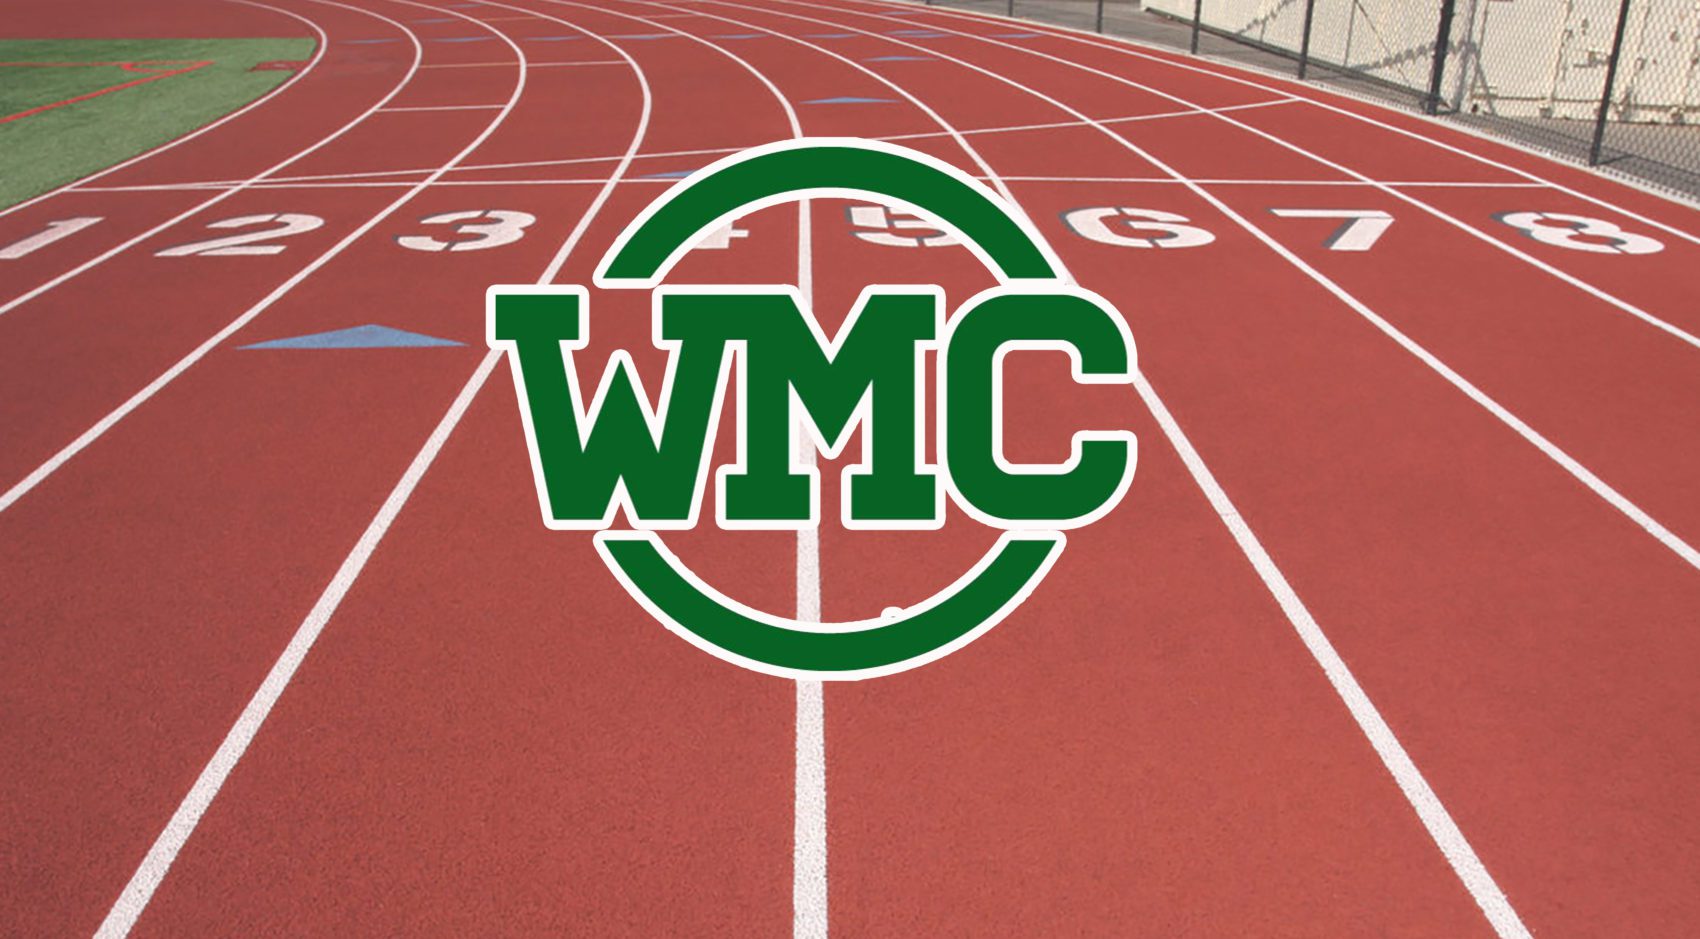 WMC girls track captures Division 4 regional title with VanderKooi leading way